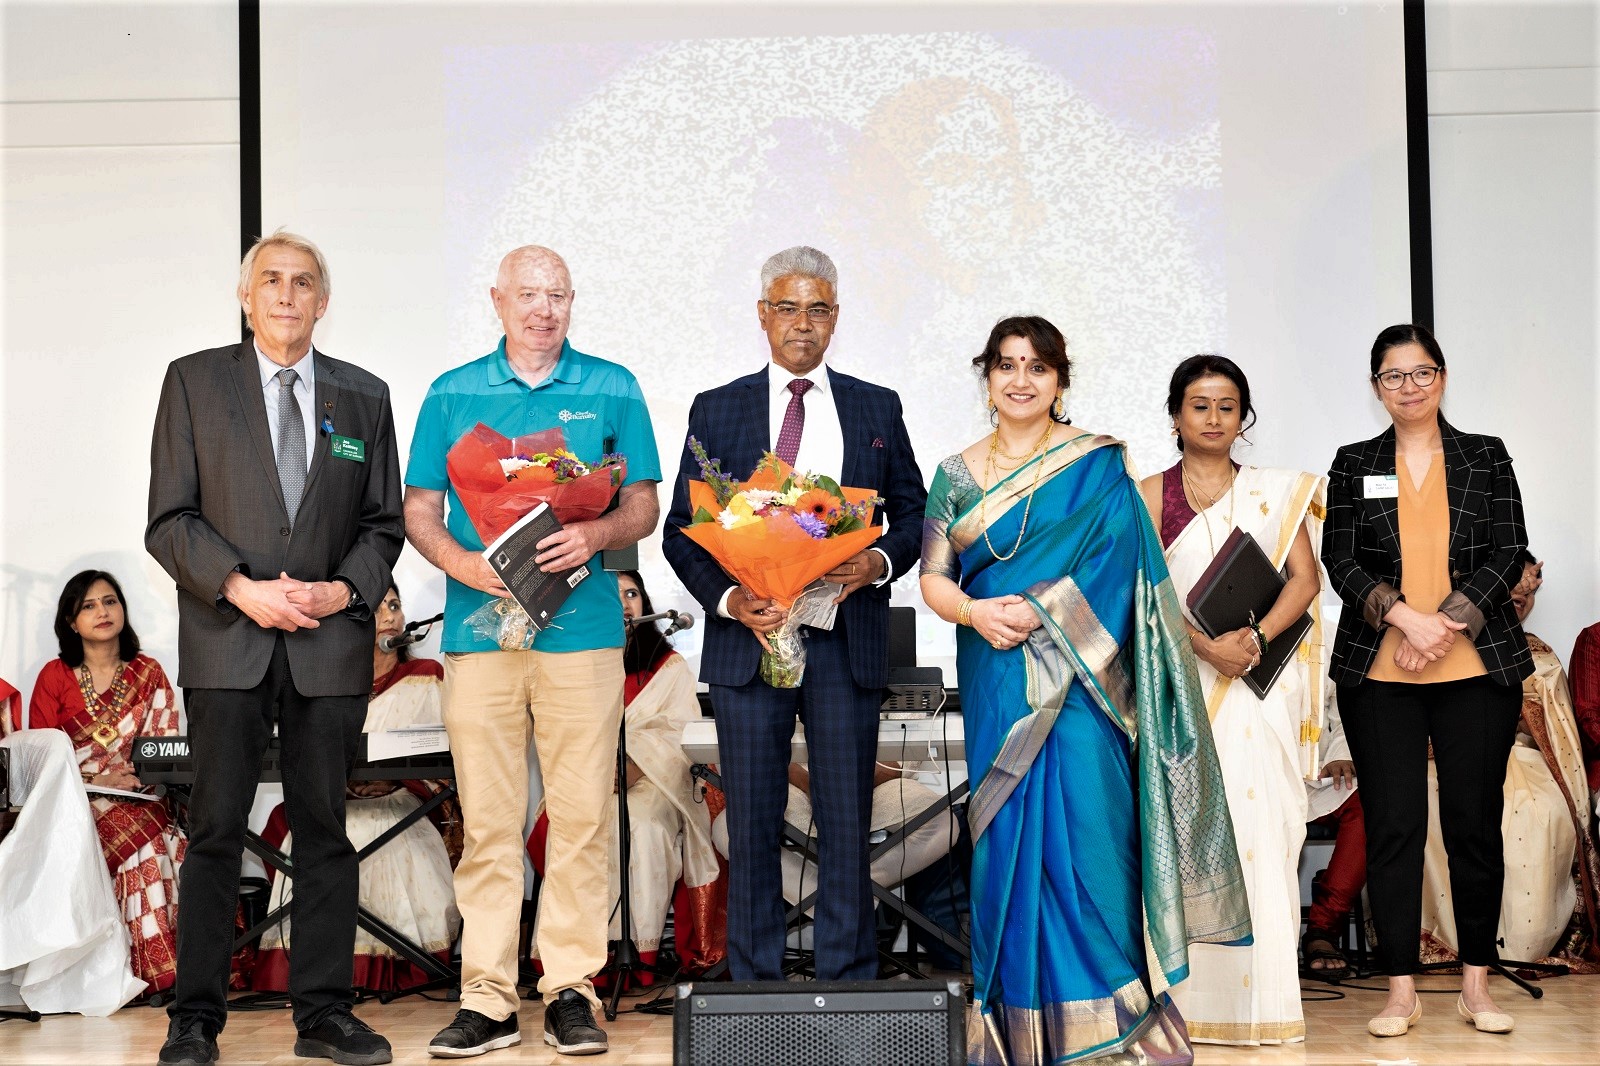 Consulate General of India in Vancouver celebrates Nobel laureate Rabindranath Tagore's 162nd birth anniversary